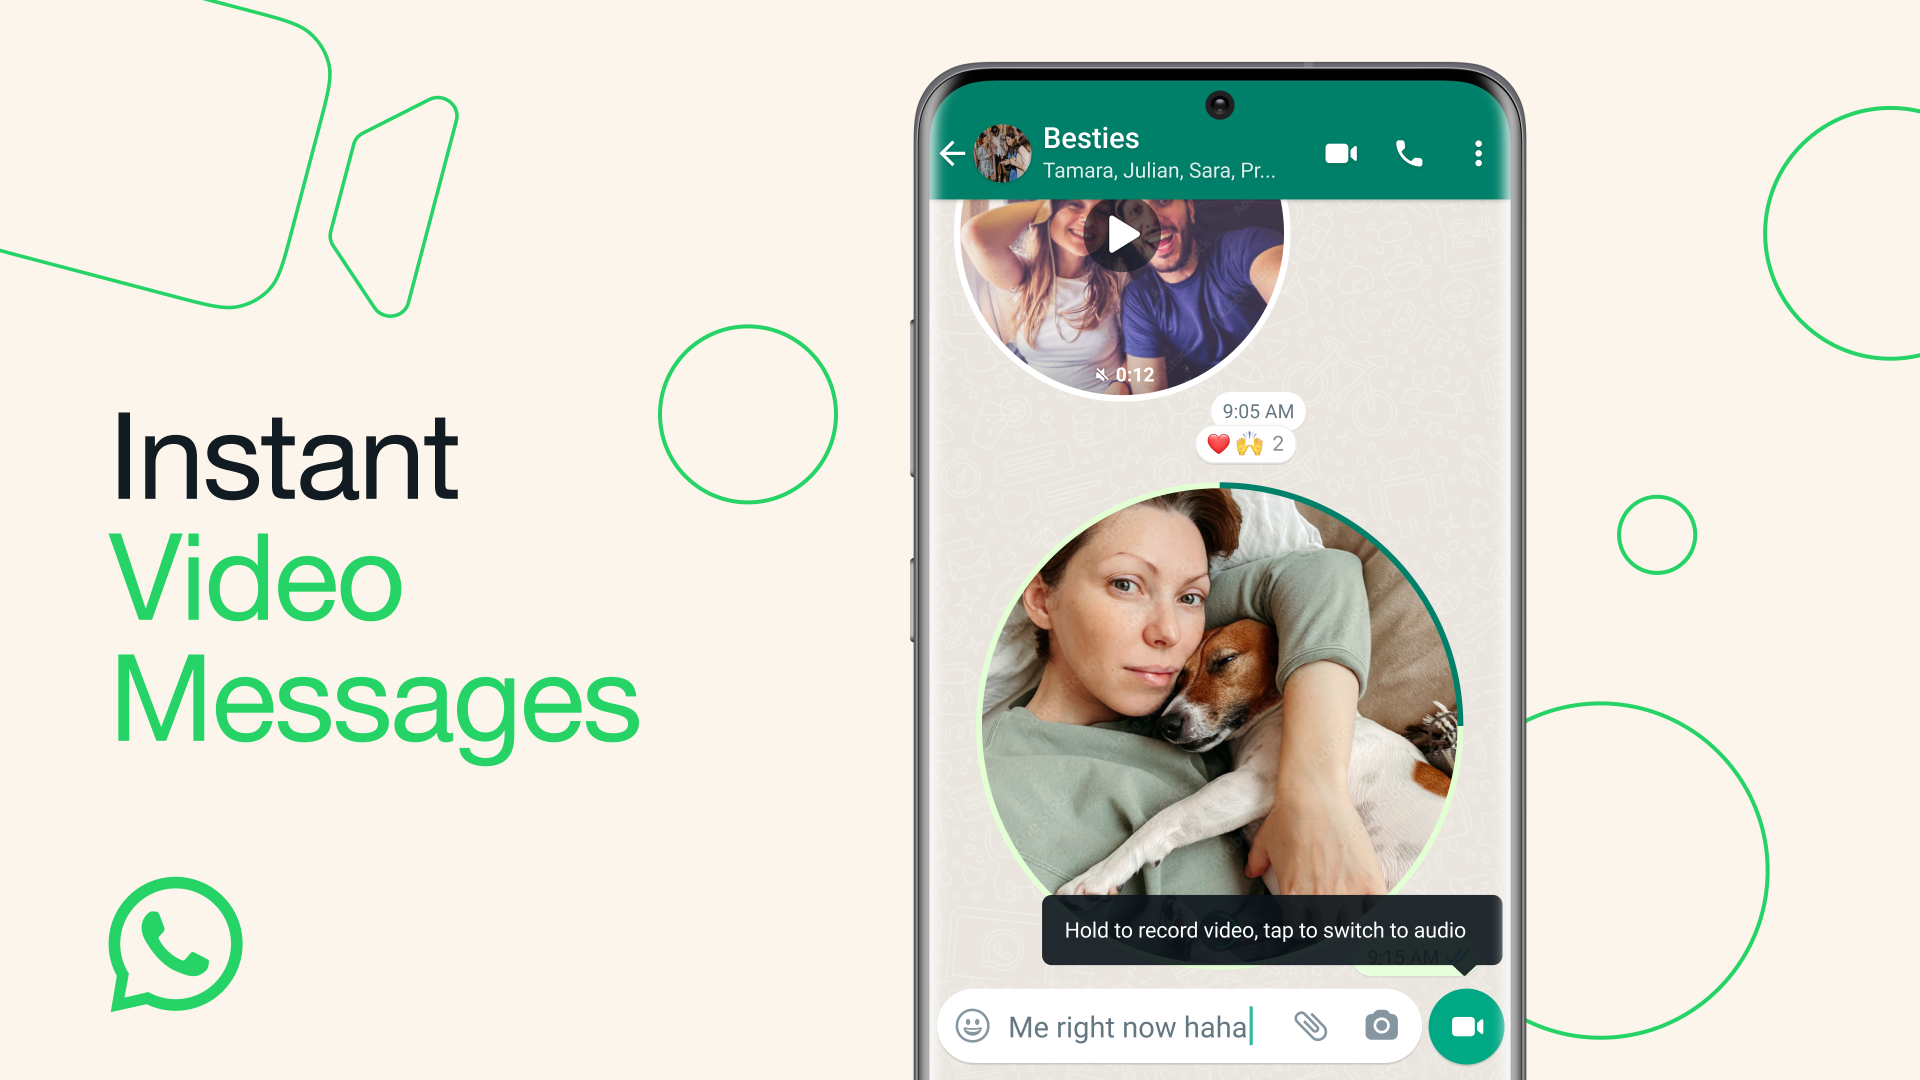 WhatsApp New Feature Enables Users To Send Instant Video Messages-SEE HOW!